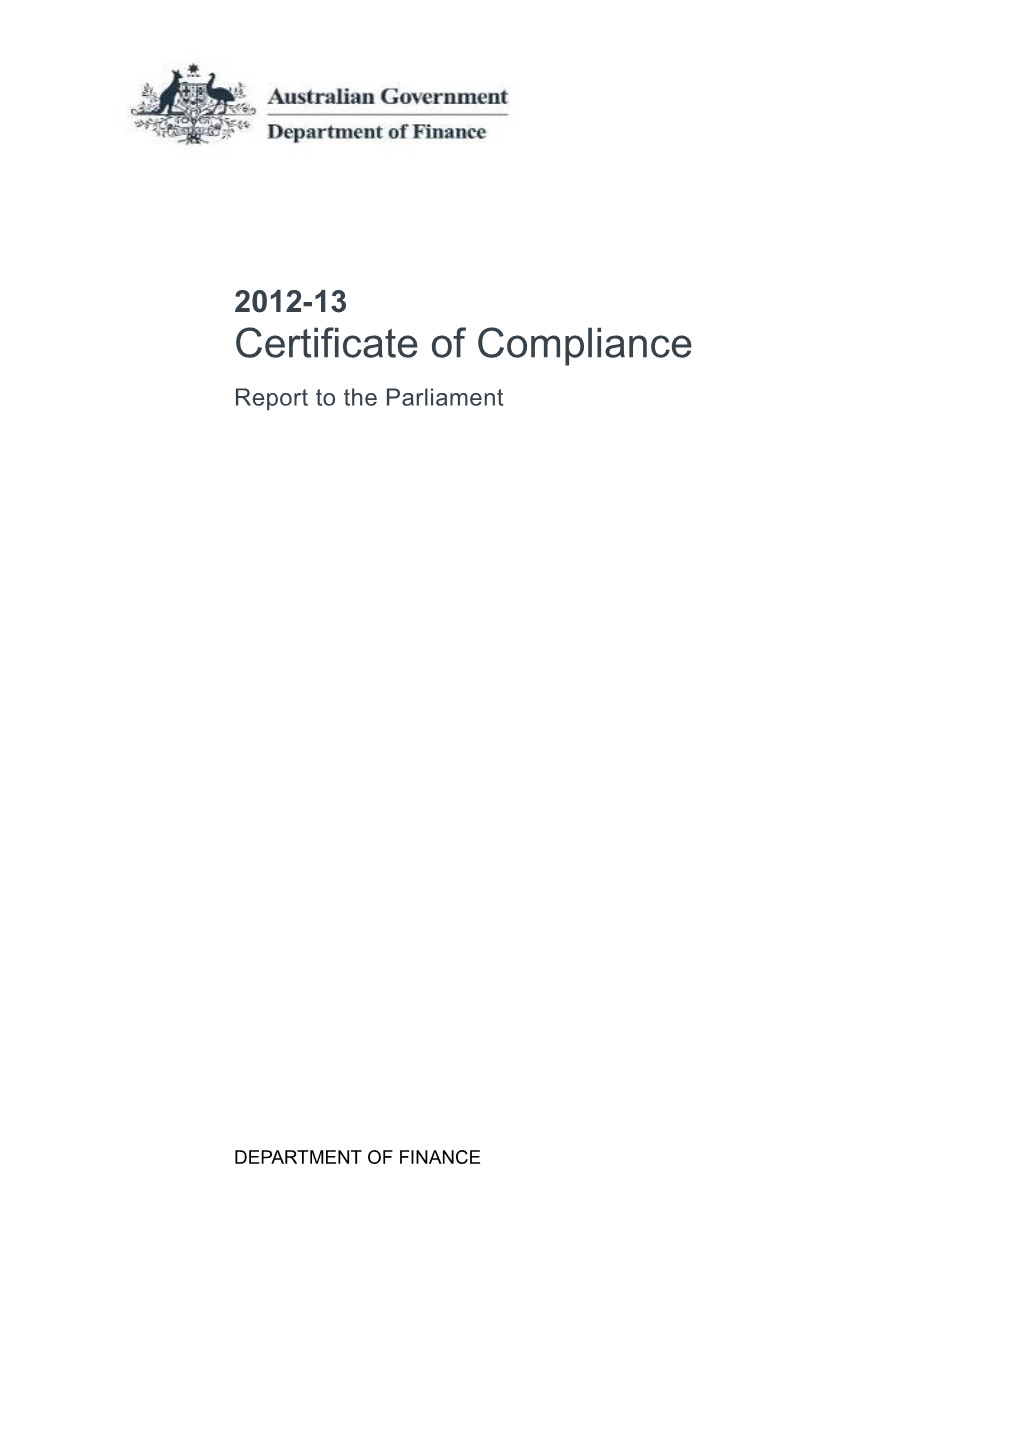 2012-13 Certificate of Compliance Report